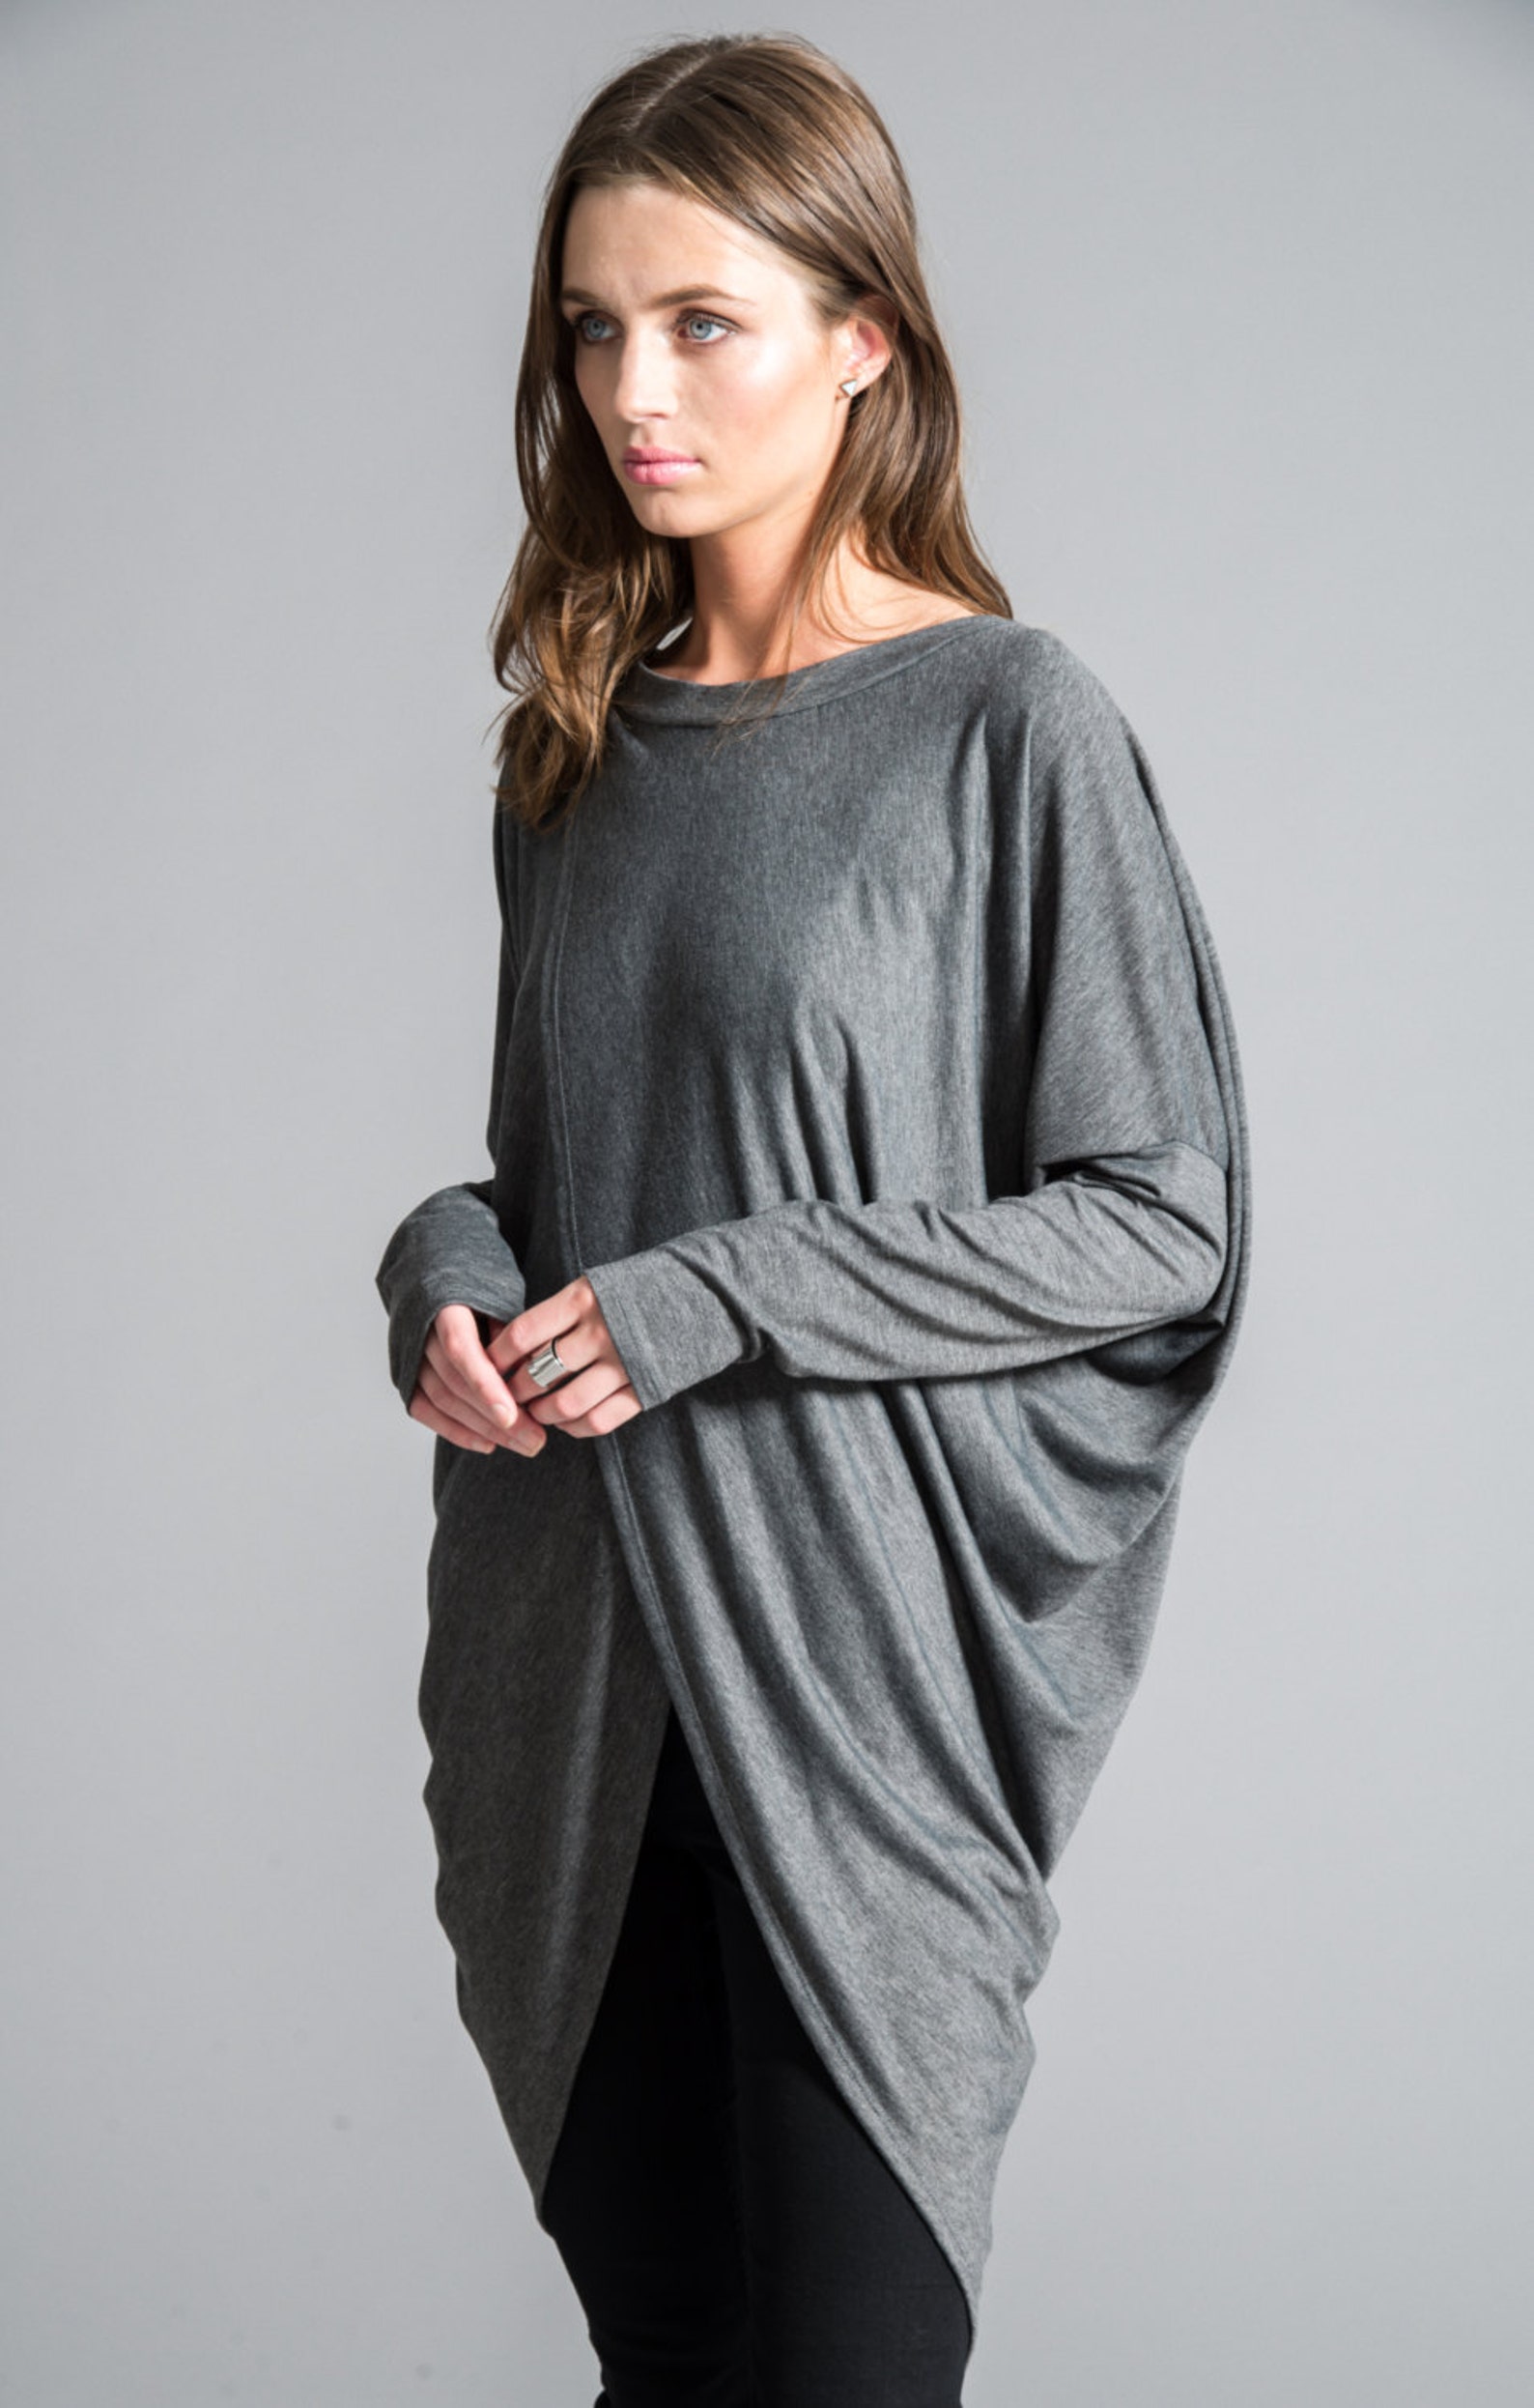 Charcoal Grey Oversize Tunic Top Asymmetric Loose Top Casual | Etsy